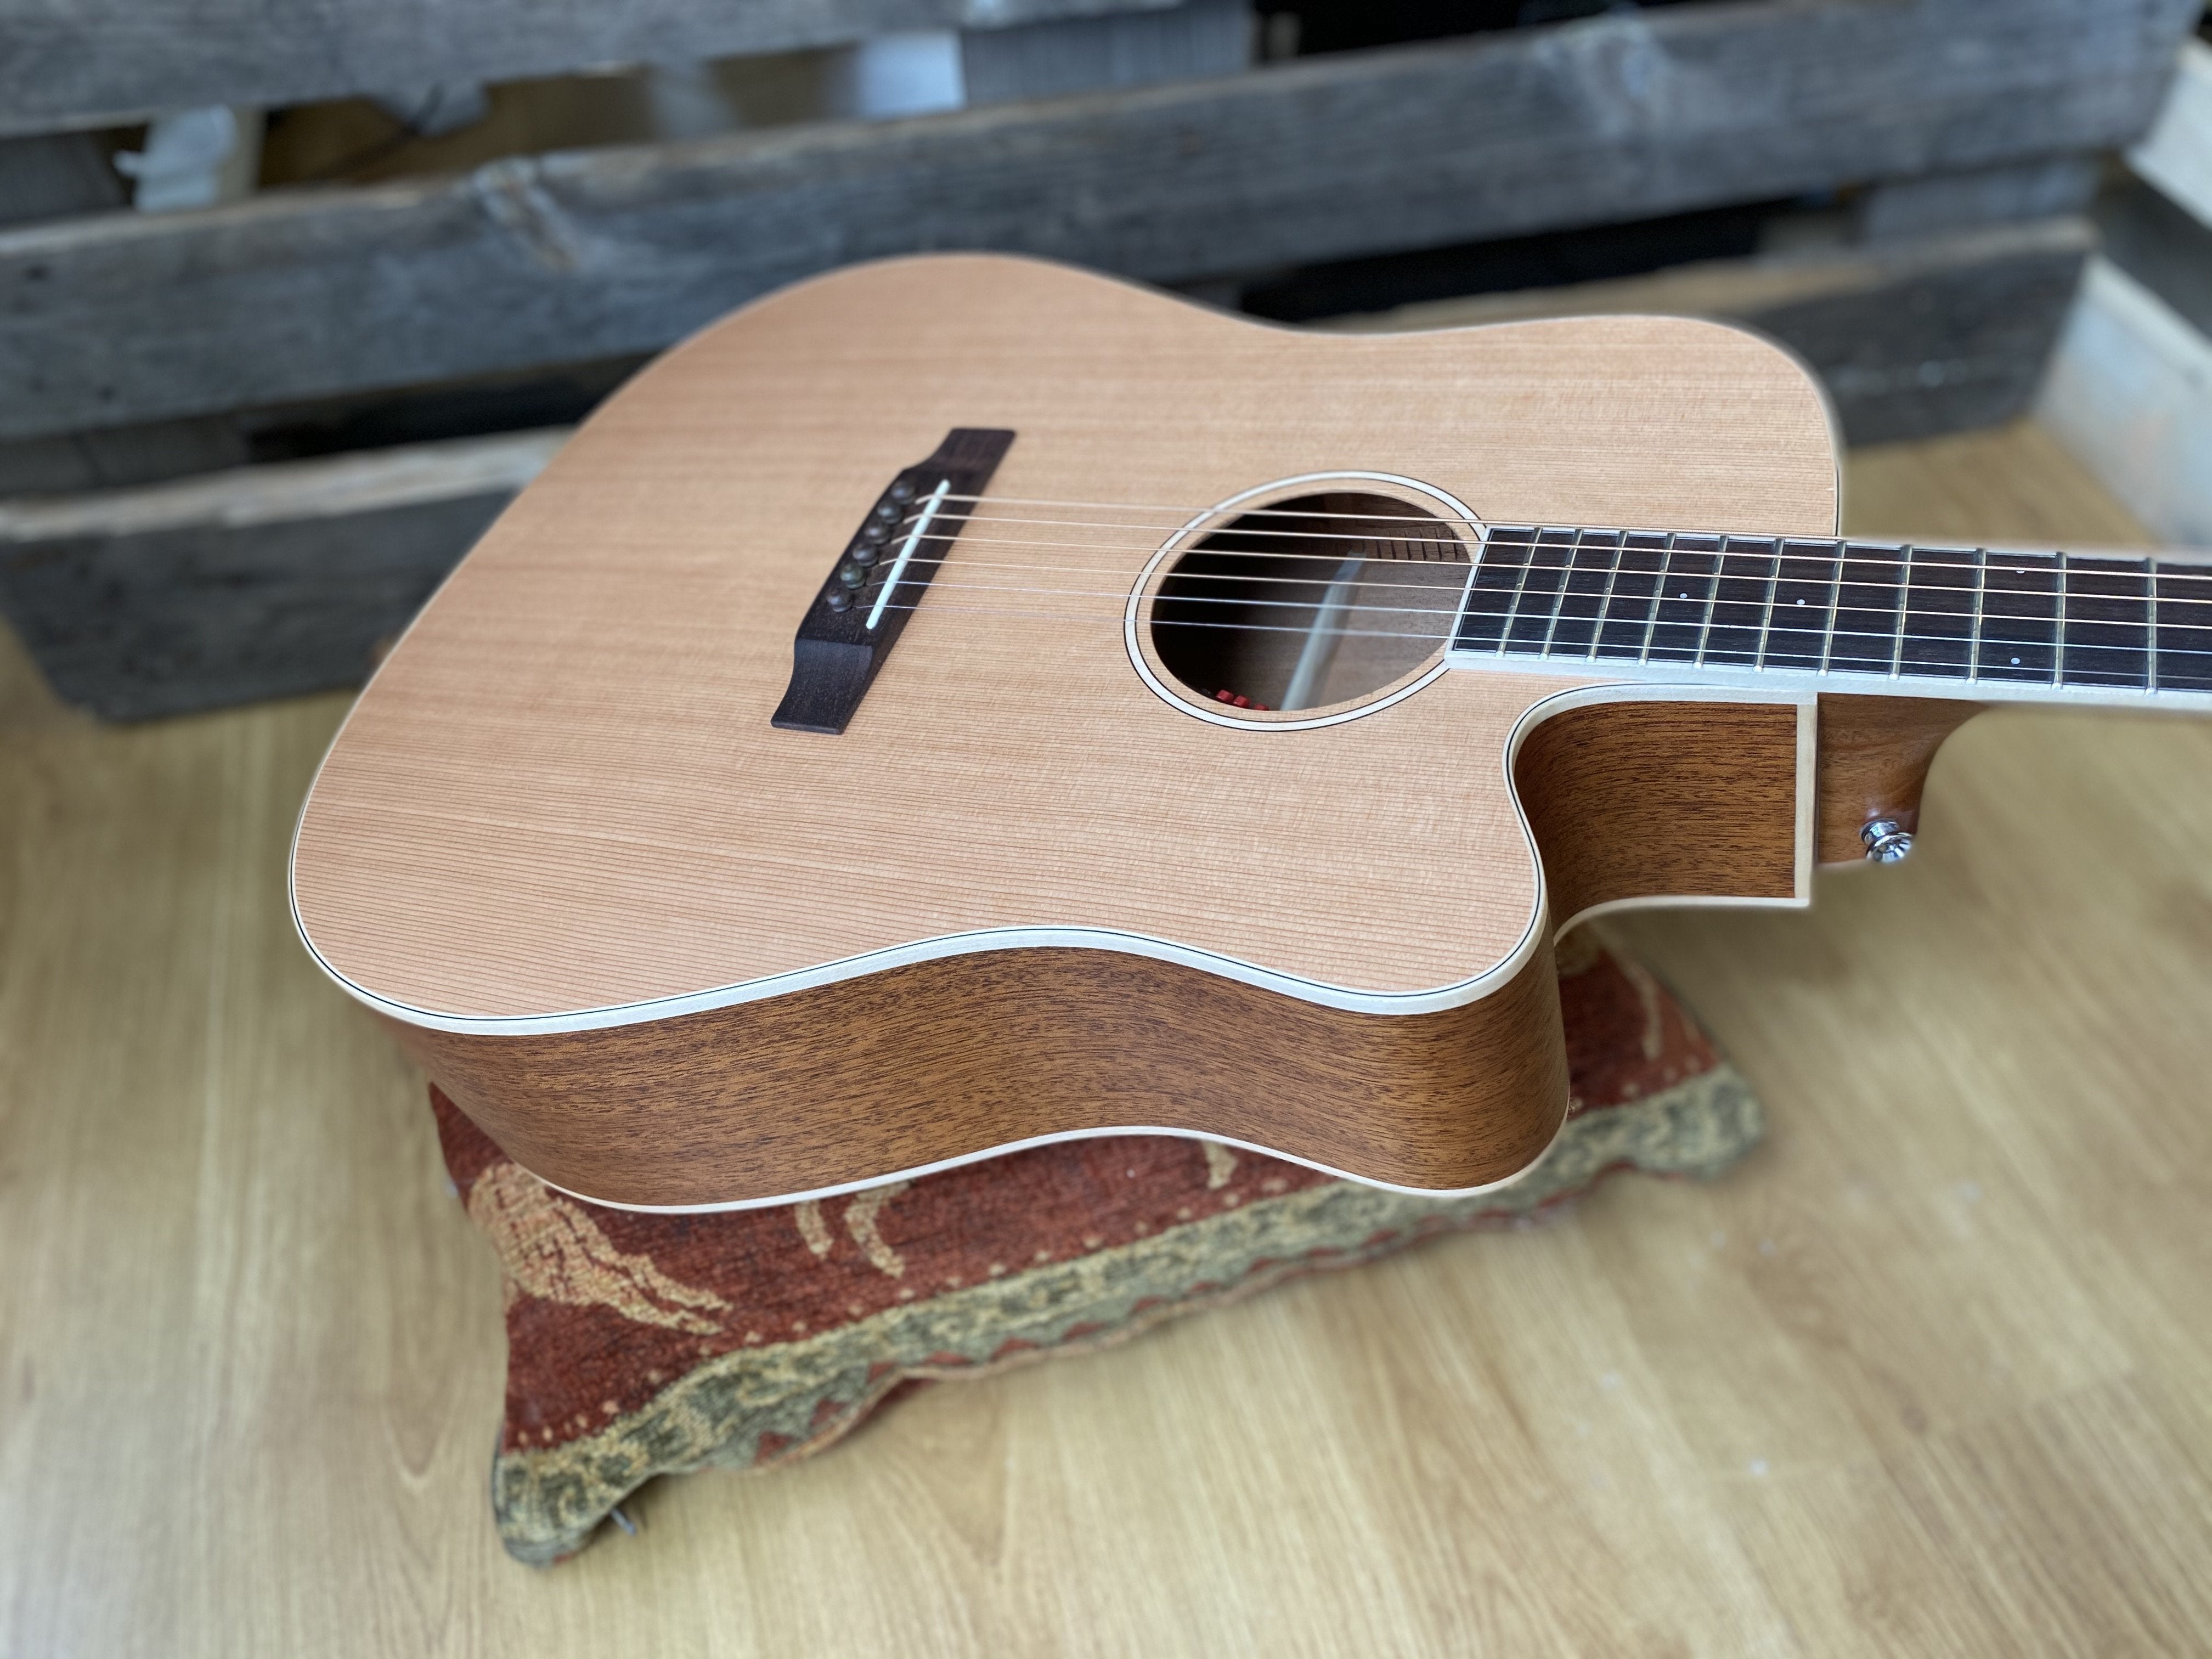 Auden Neo Colton Cutaway., Electro Acoustic Guitar for sale at Richards Guitars.